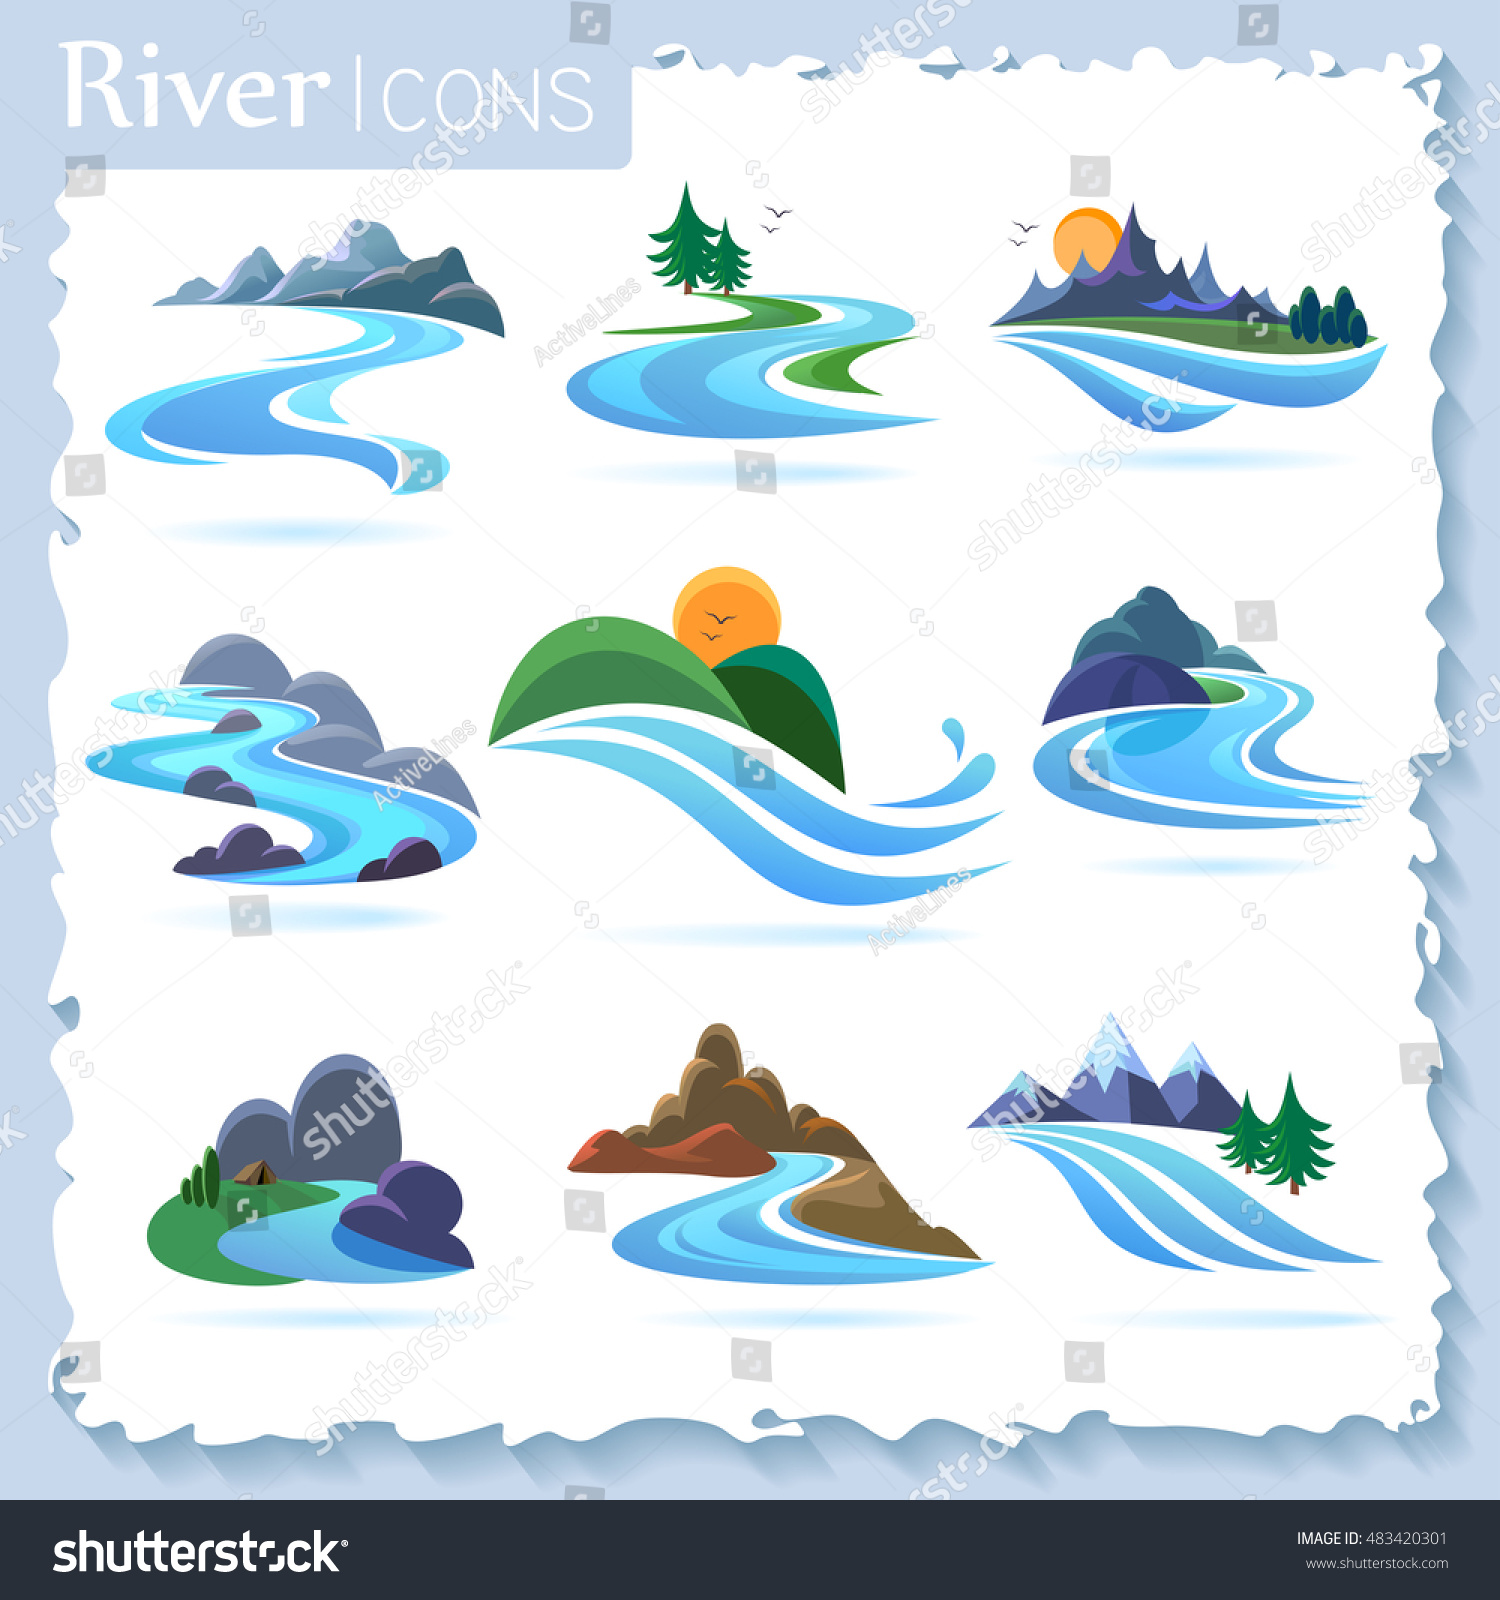 River and landscape icons #483420301